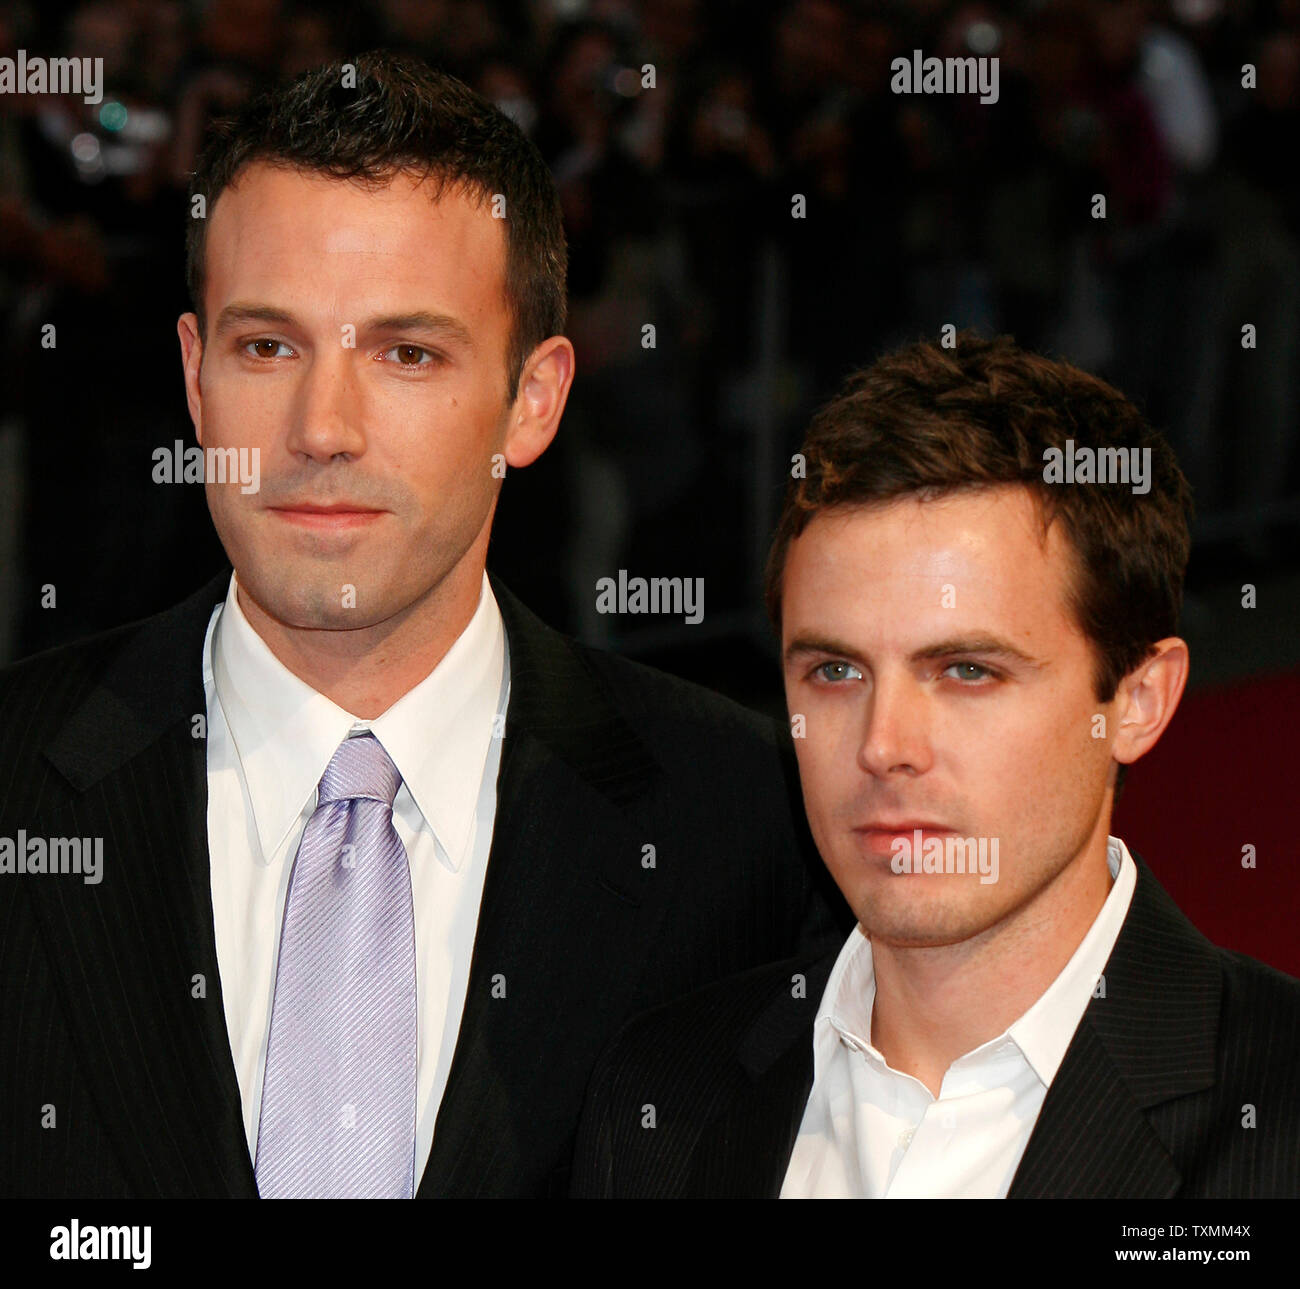 Actors Ben Affleck (L) and brother Casey arrive on the red carpet at the 33rd American Film Festival of Deauville in Deauville, France on September 5, 2007.  The brothers are at the festival with their film 'Gone, Baby, Gone', in which Ben Affleck makes his directorial debut.   (UPI Photo/David Silpa) Stock Photo